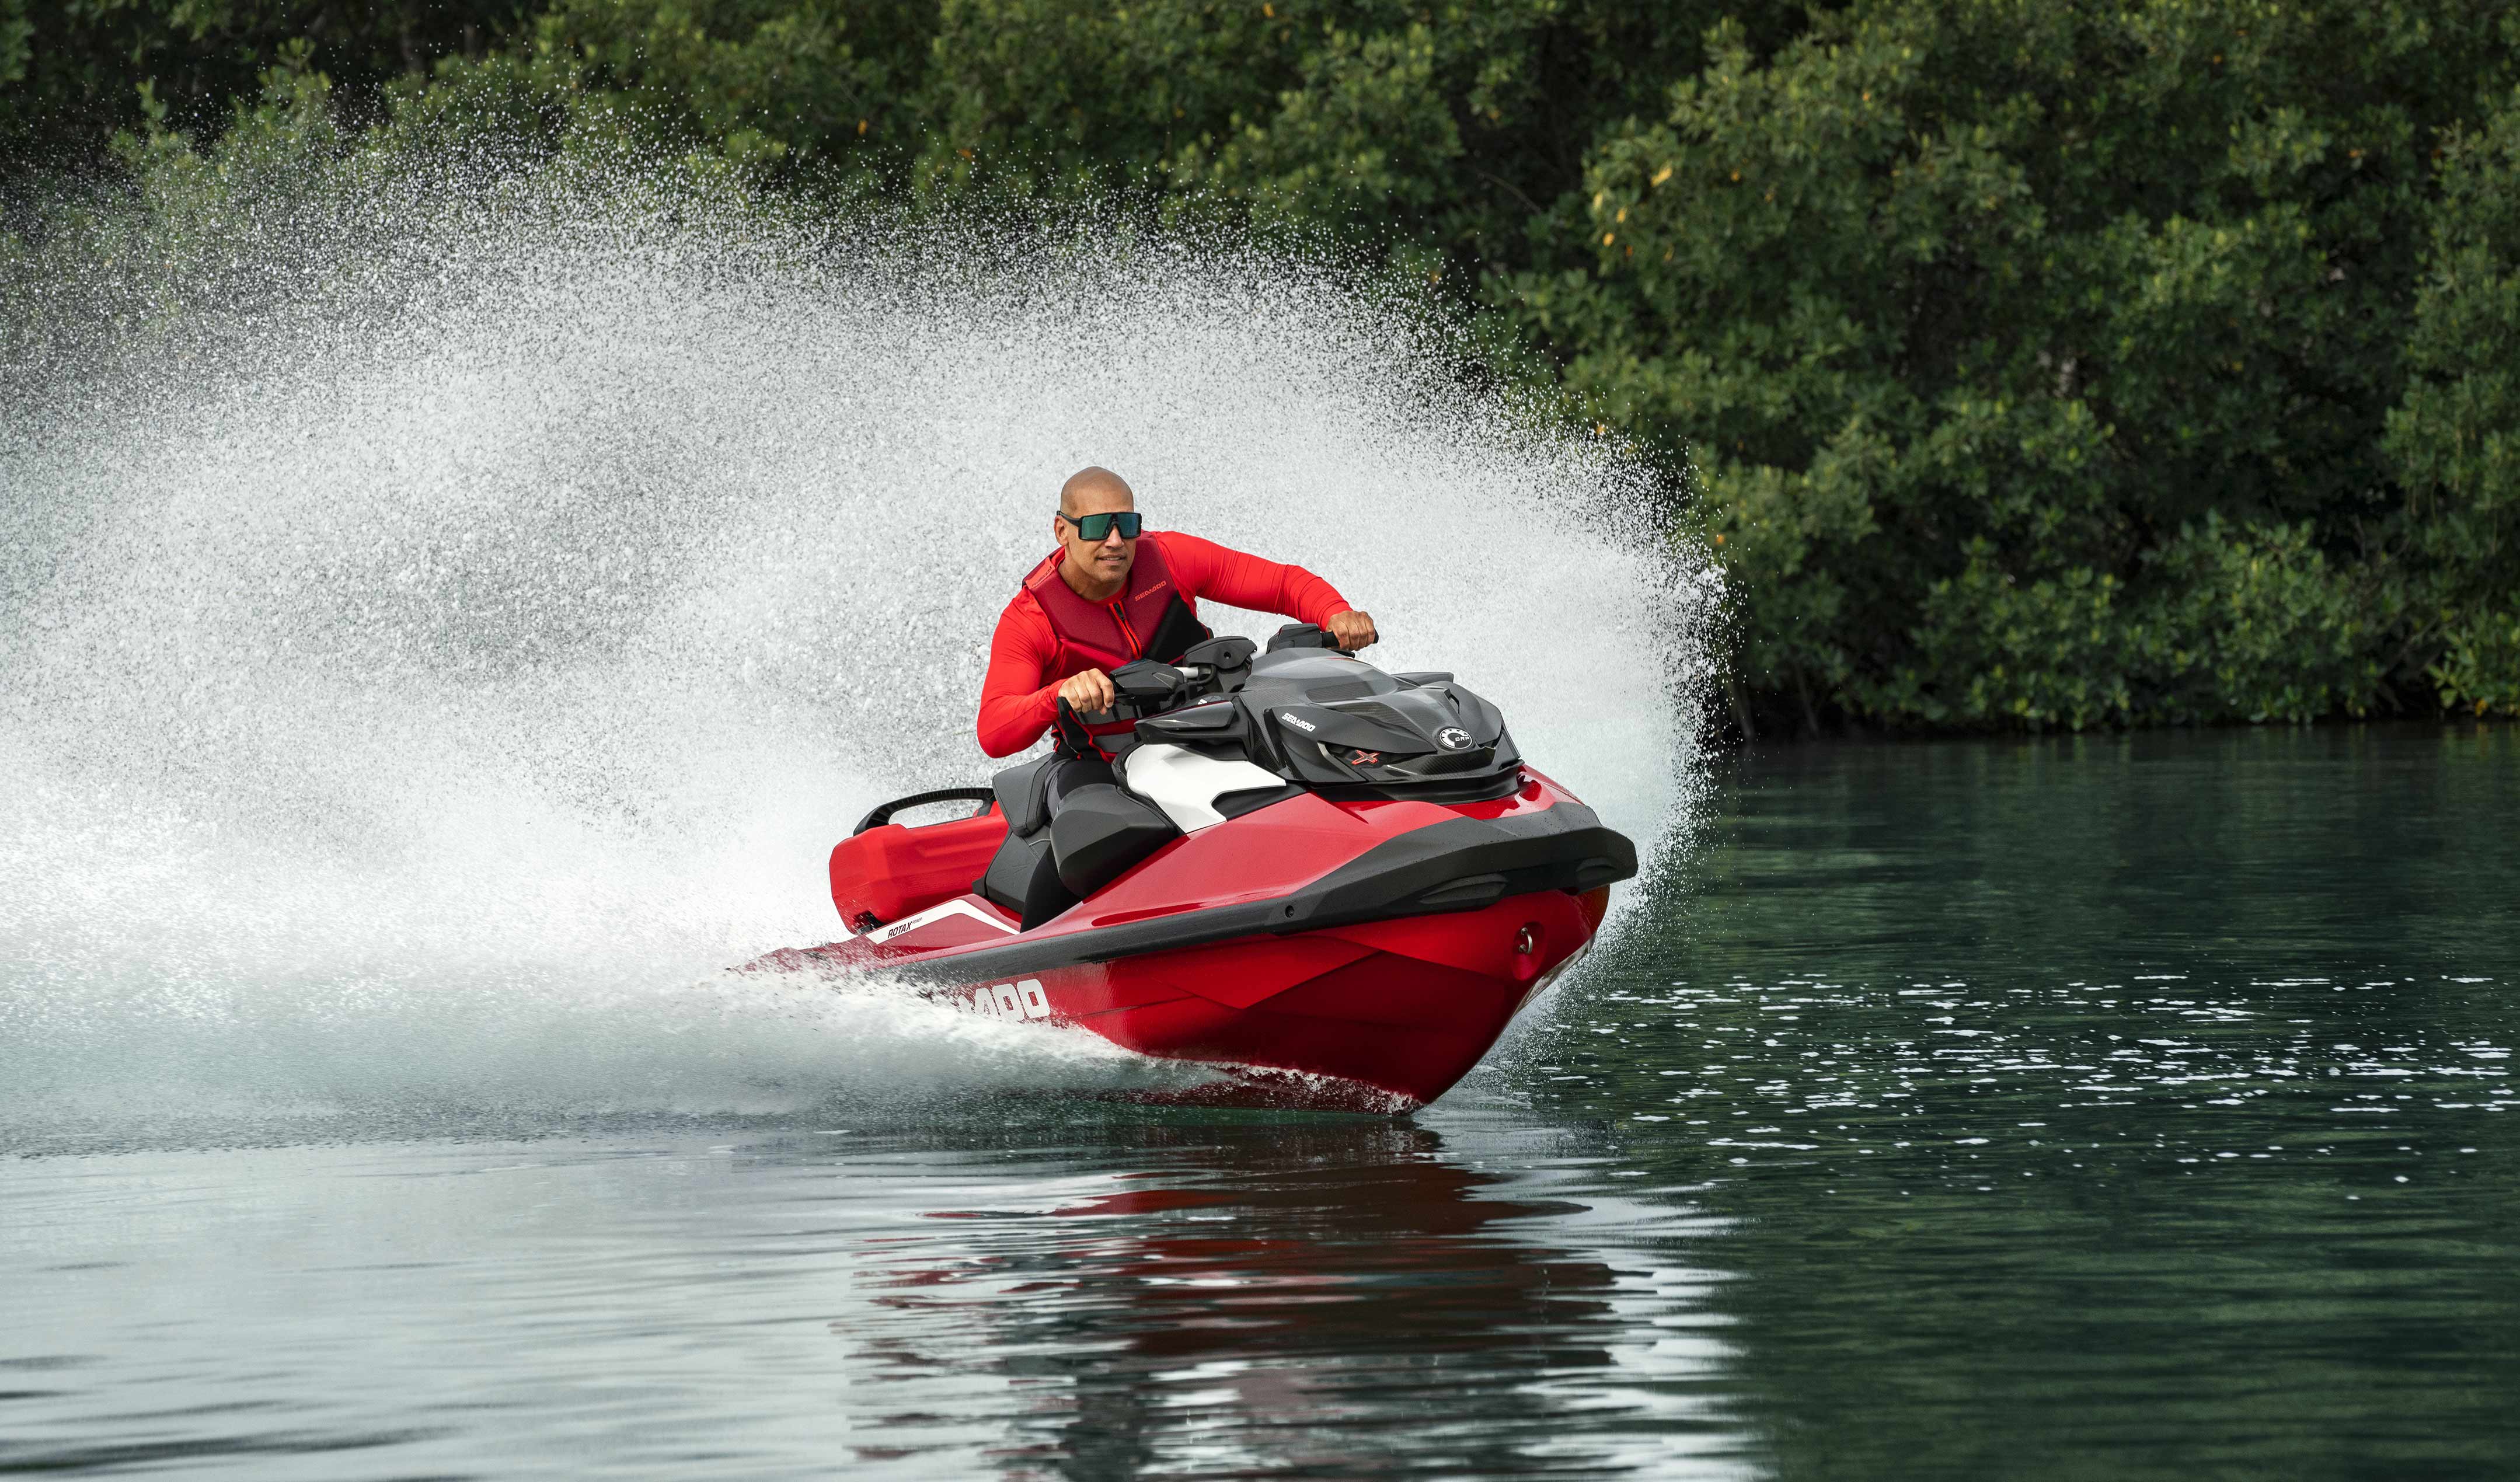 Rider driving a Sea-Doo RXP-X personal watercraft